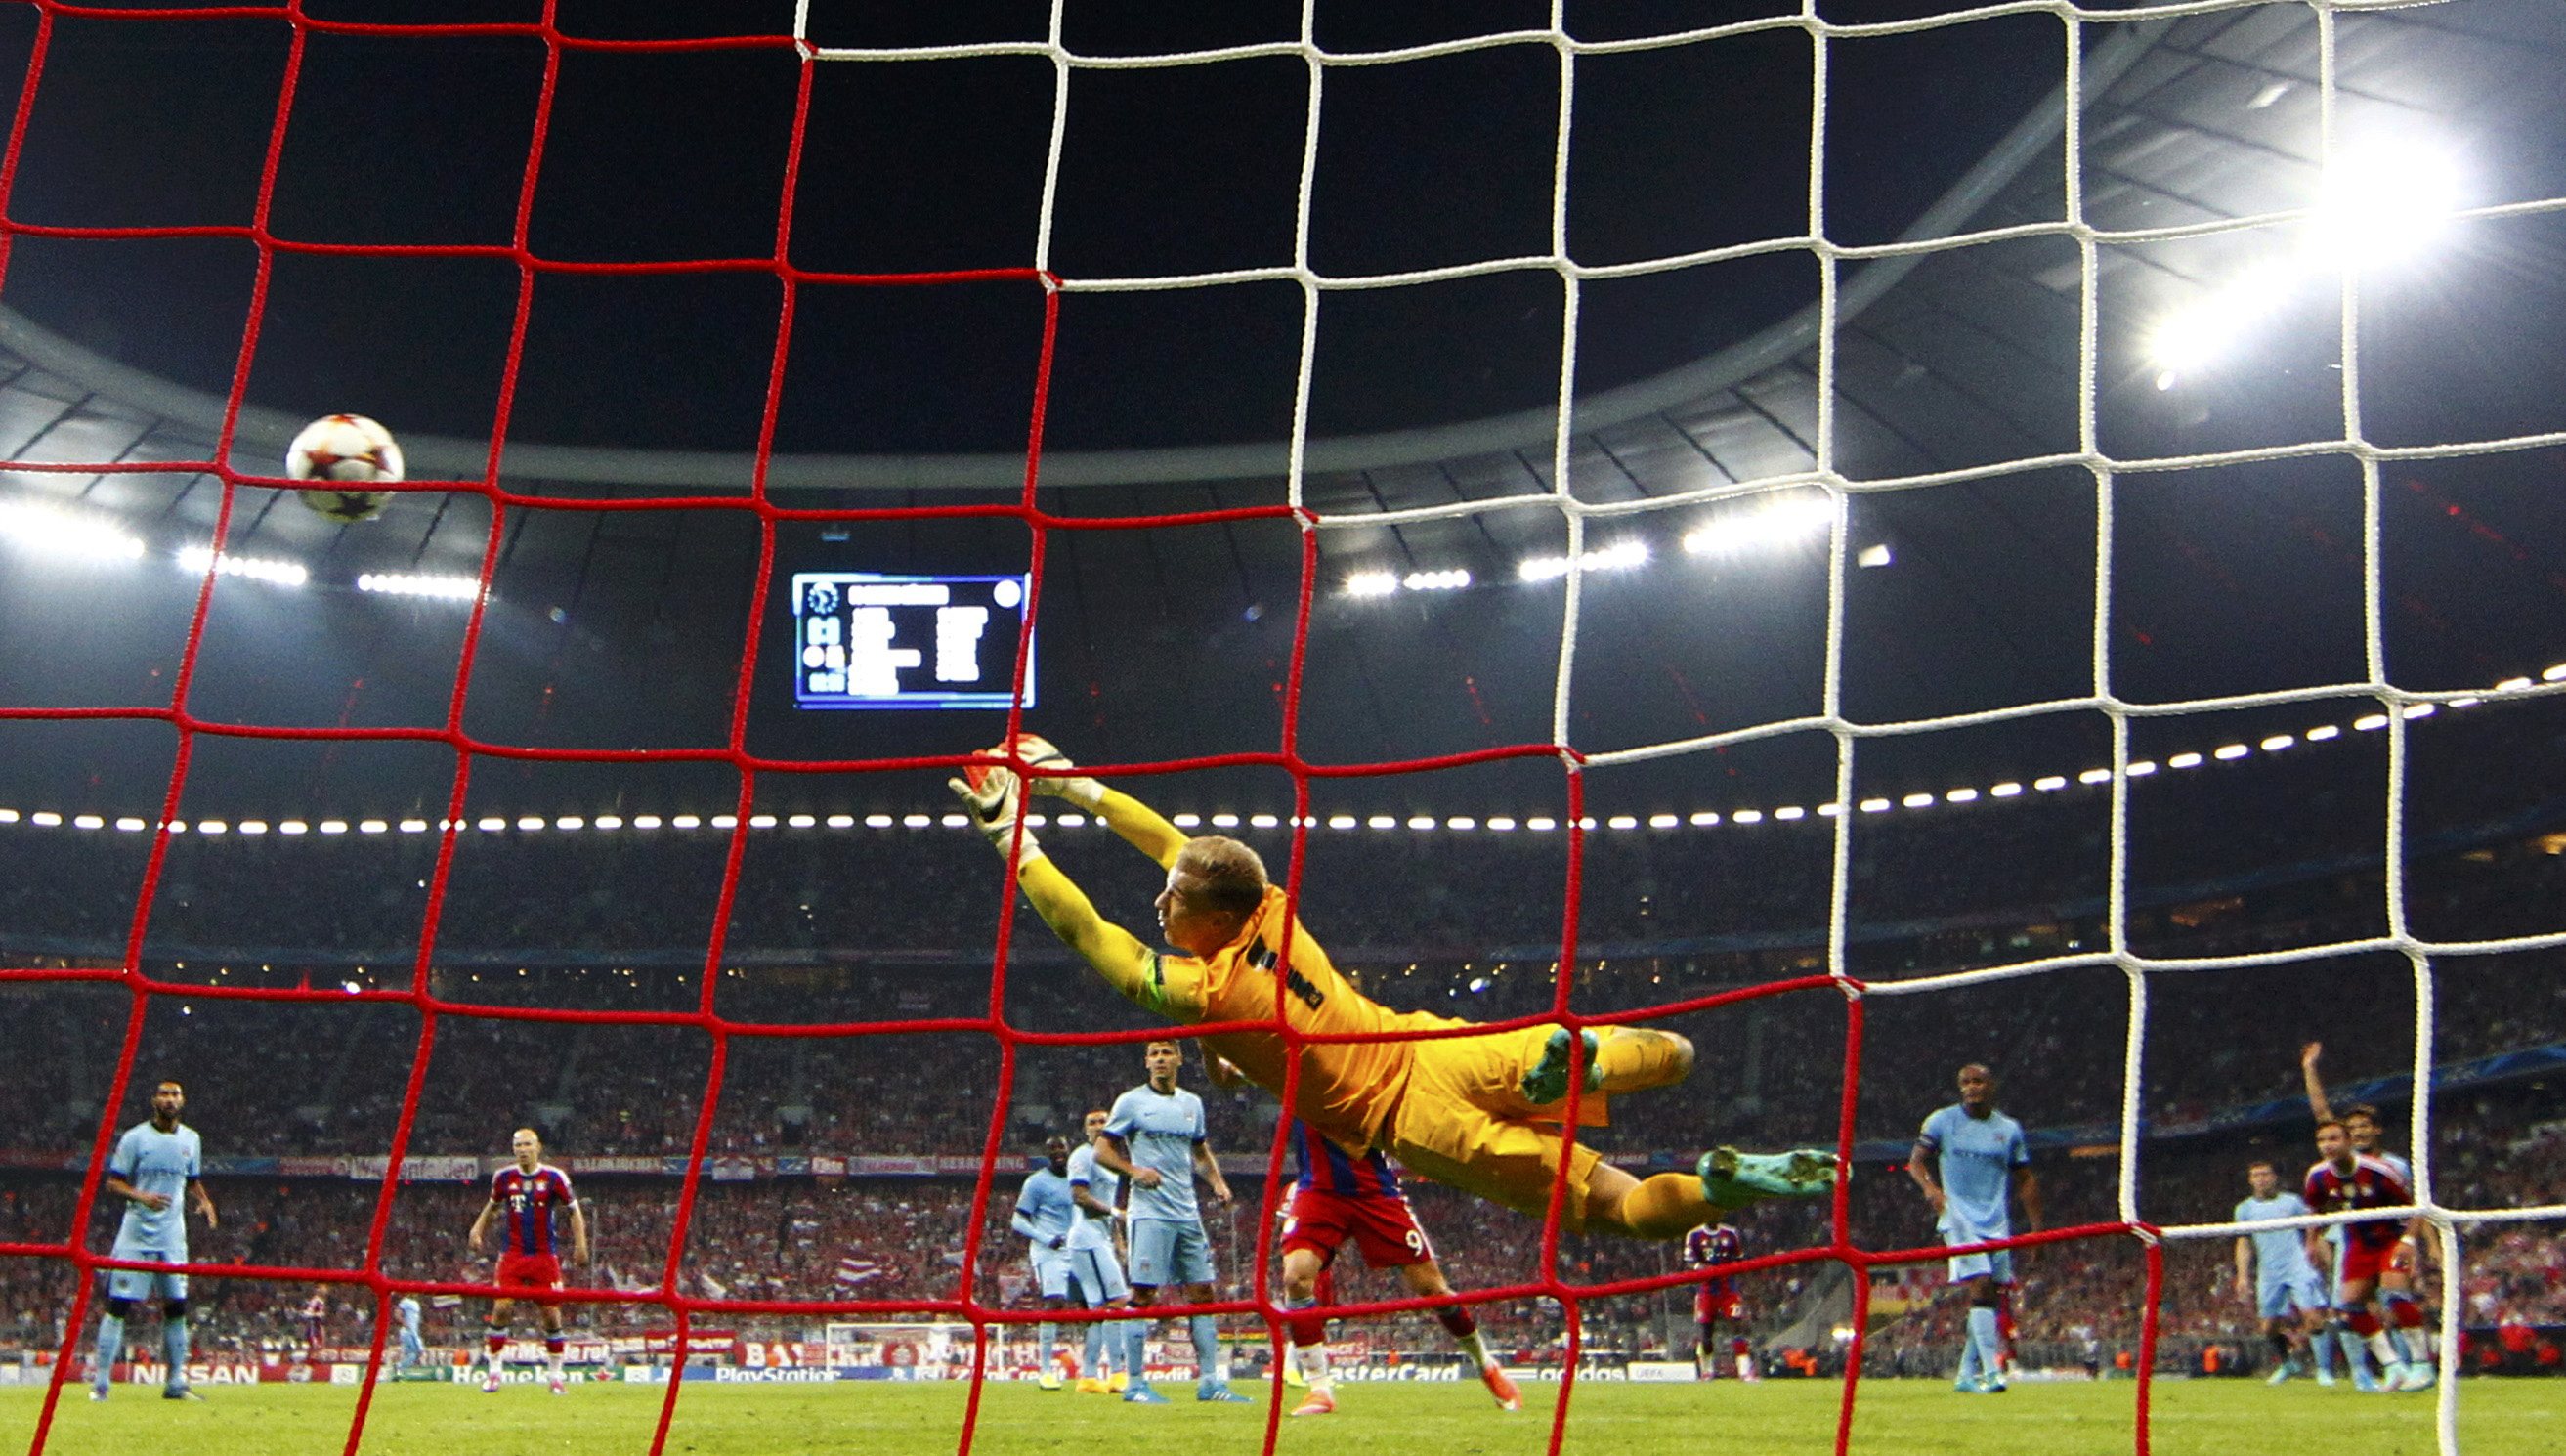 Last-gasp Boateng goal hands Bayern win over City